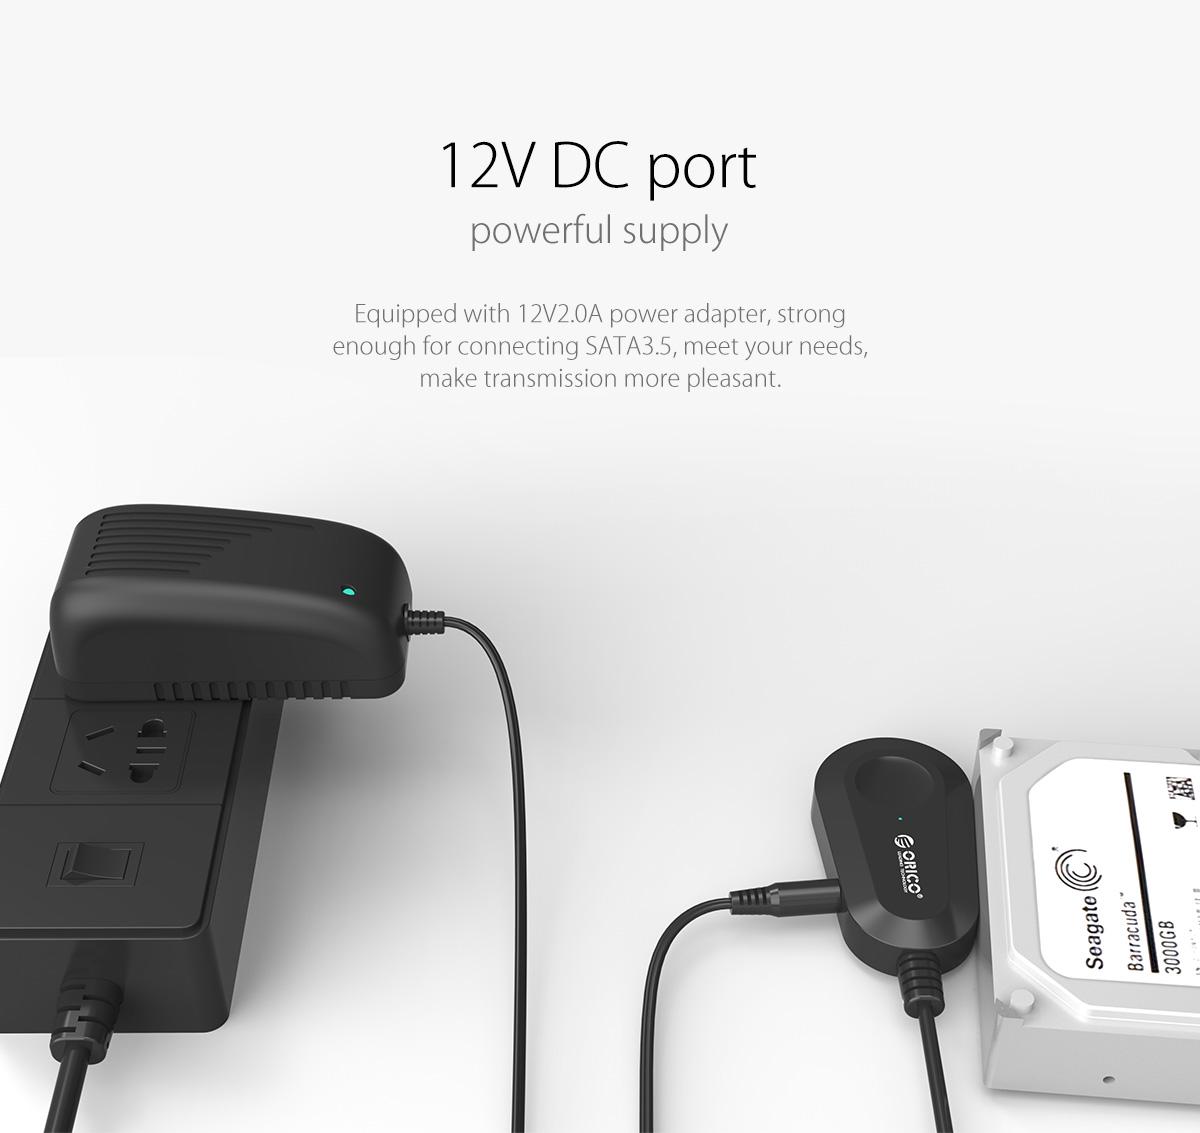 the USB3.0 to SATA hard drive adapter is equipped with 12V2.0A power adapter